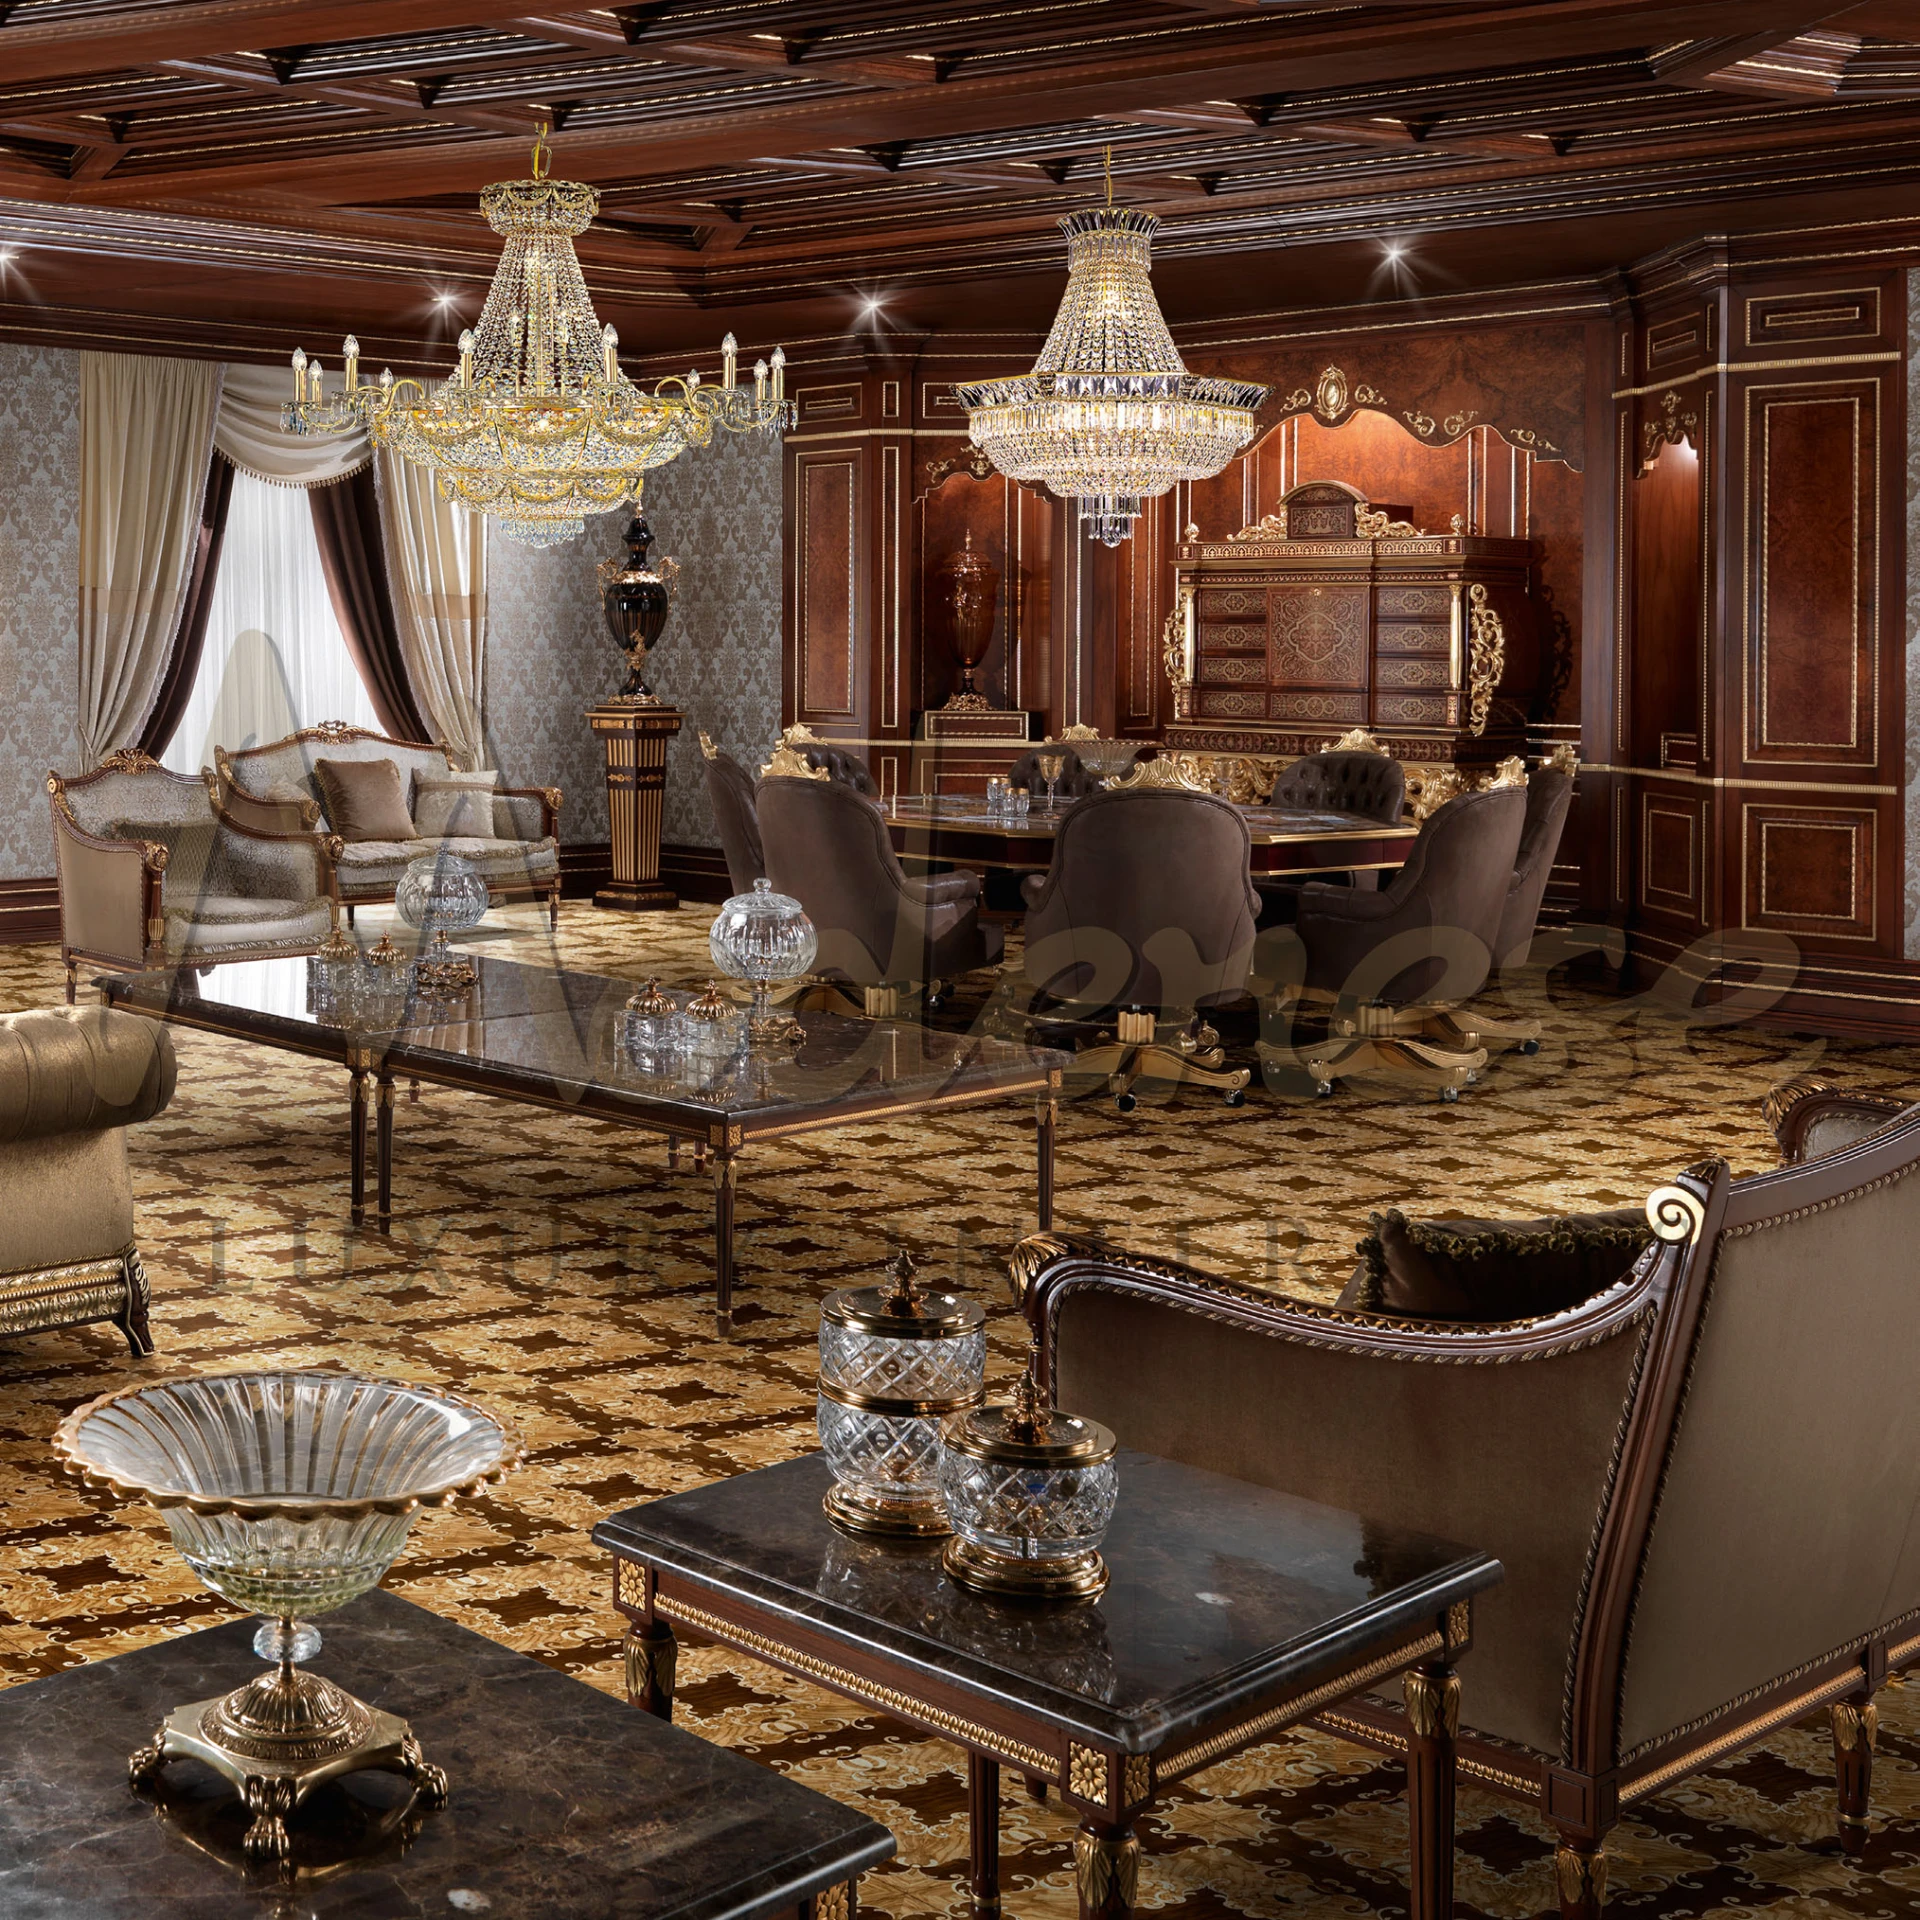 Modenese Furniture's masterpiece: A massive interior with gold leaf hand carvings, solid wood structure enhance its grandeur